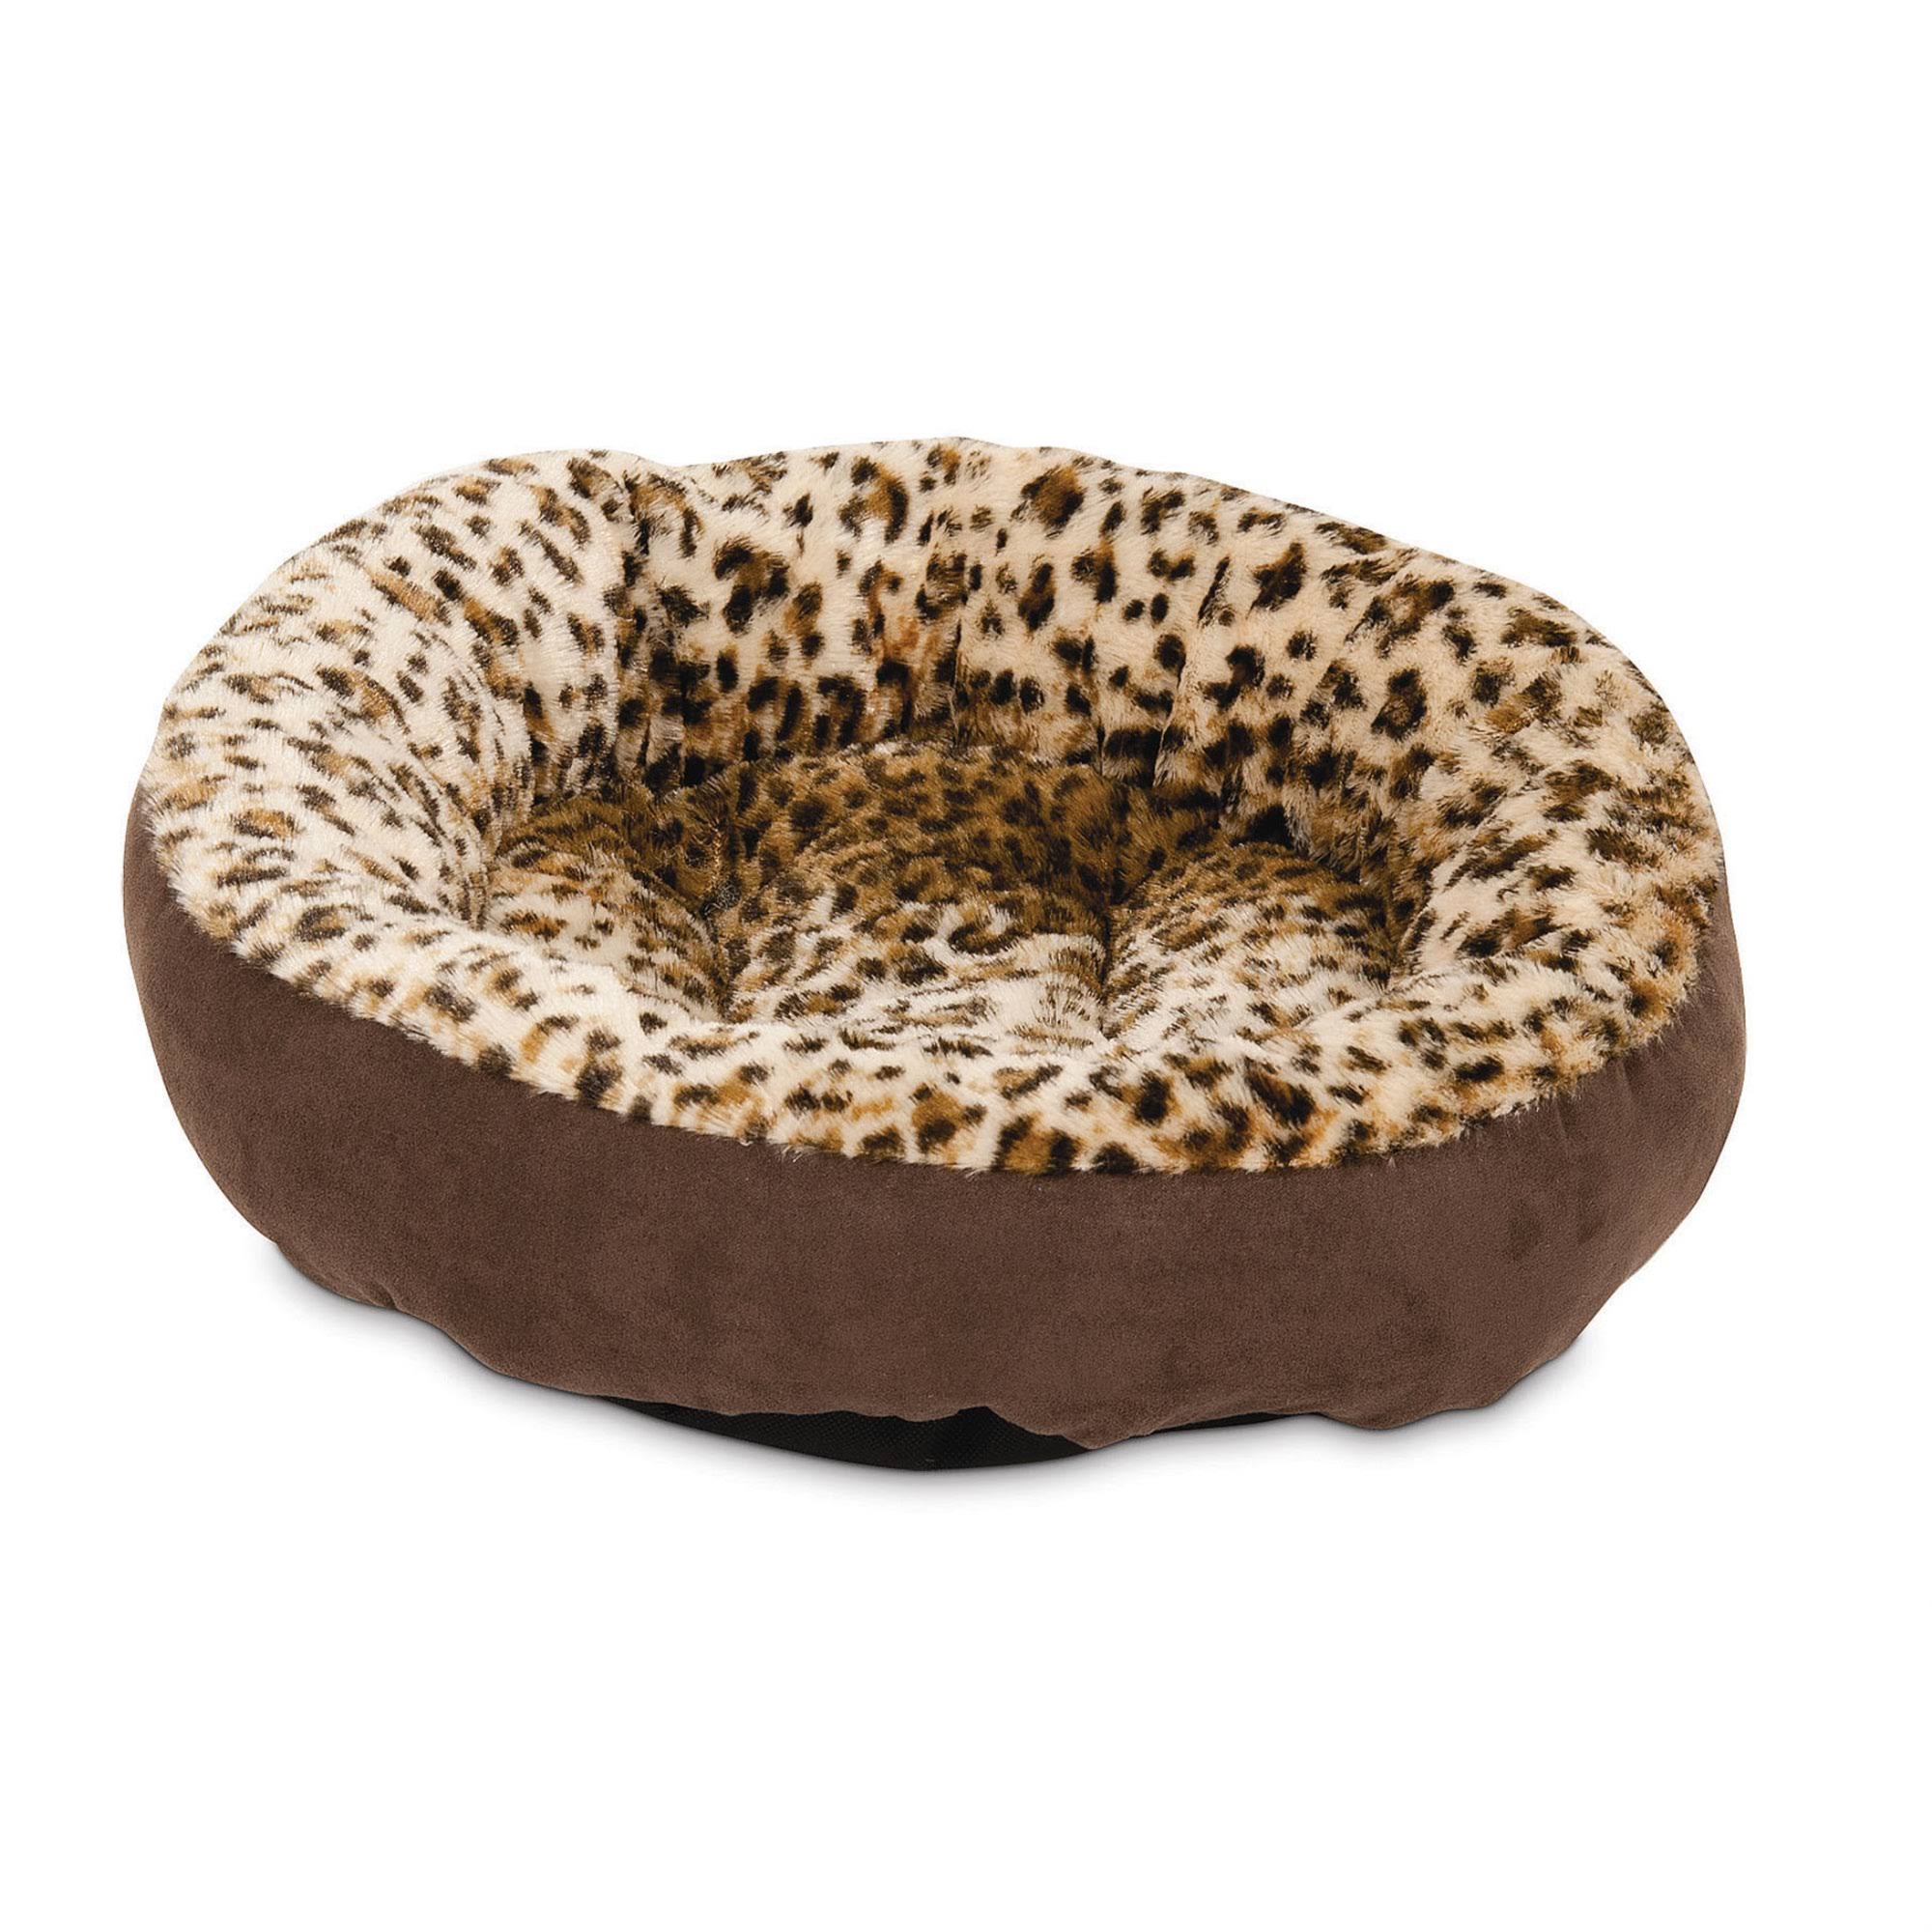 Petmate Beds Round Bolster Bed - Animal Print, 18" x 18"